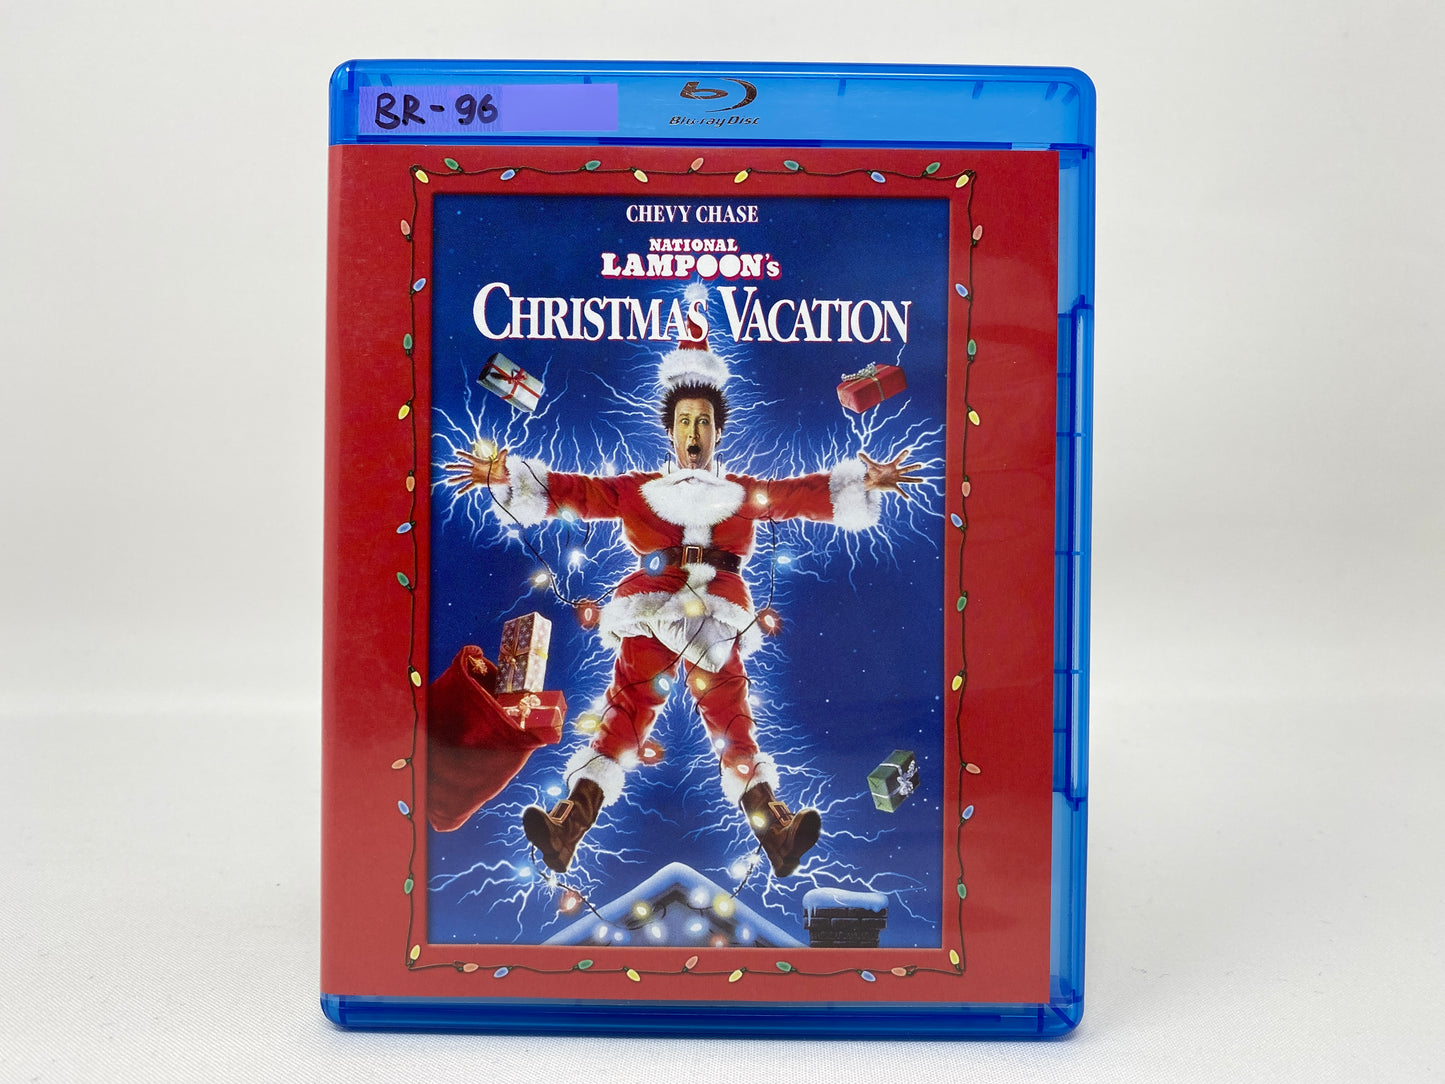 National Lampoon’s Christmas Vacation with Chevy Chase • Blu-Ray